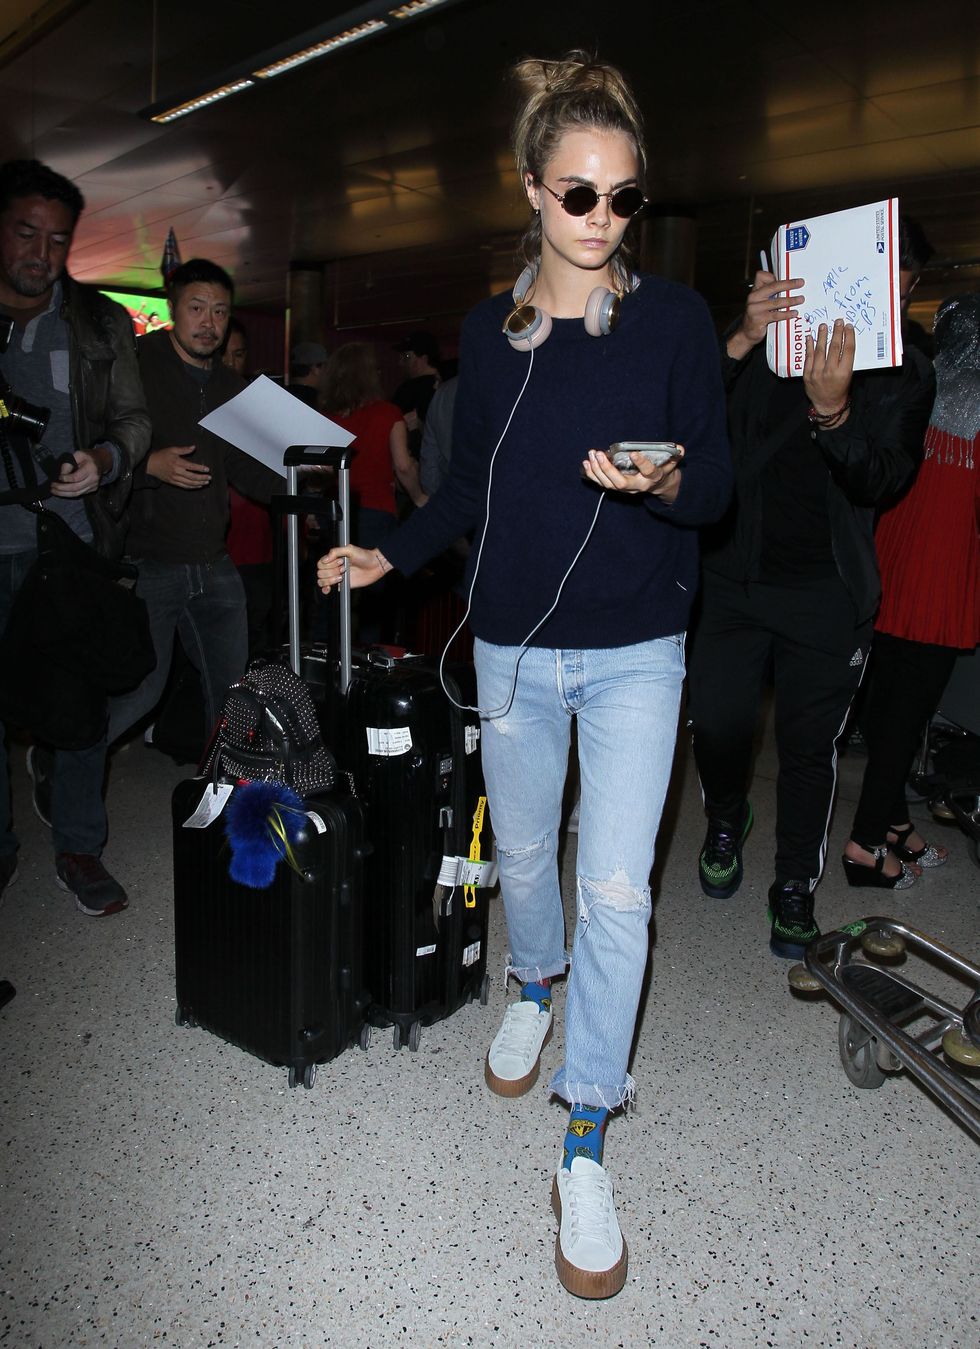 LOS ANGELES, CA - APRIL 08:  Fashion model Cara Delevingne is seen at Los Angeles International Airport (LAX) on April 8, 2016 in Los Angeles, California.  (Photo by SMXRF/Star Max/GC Images)